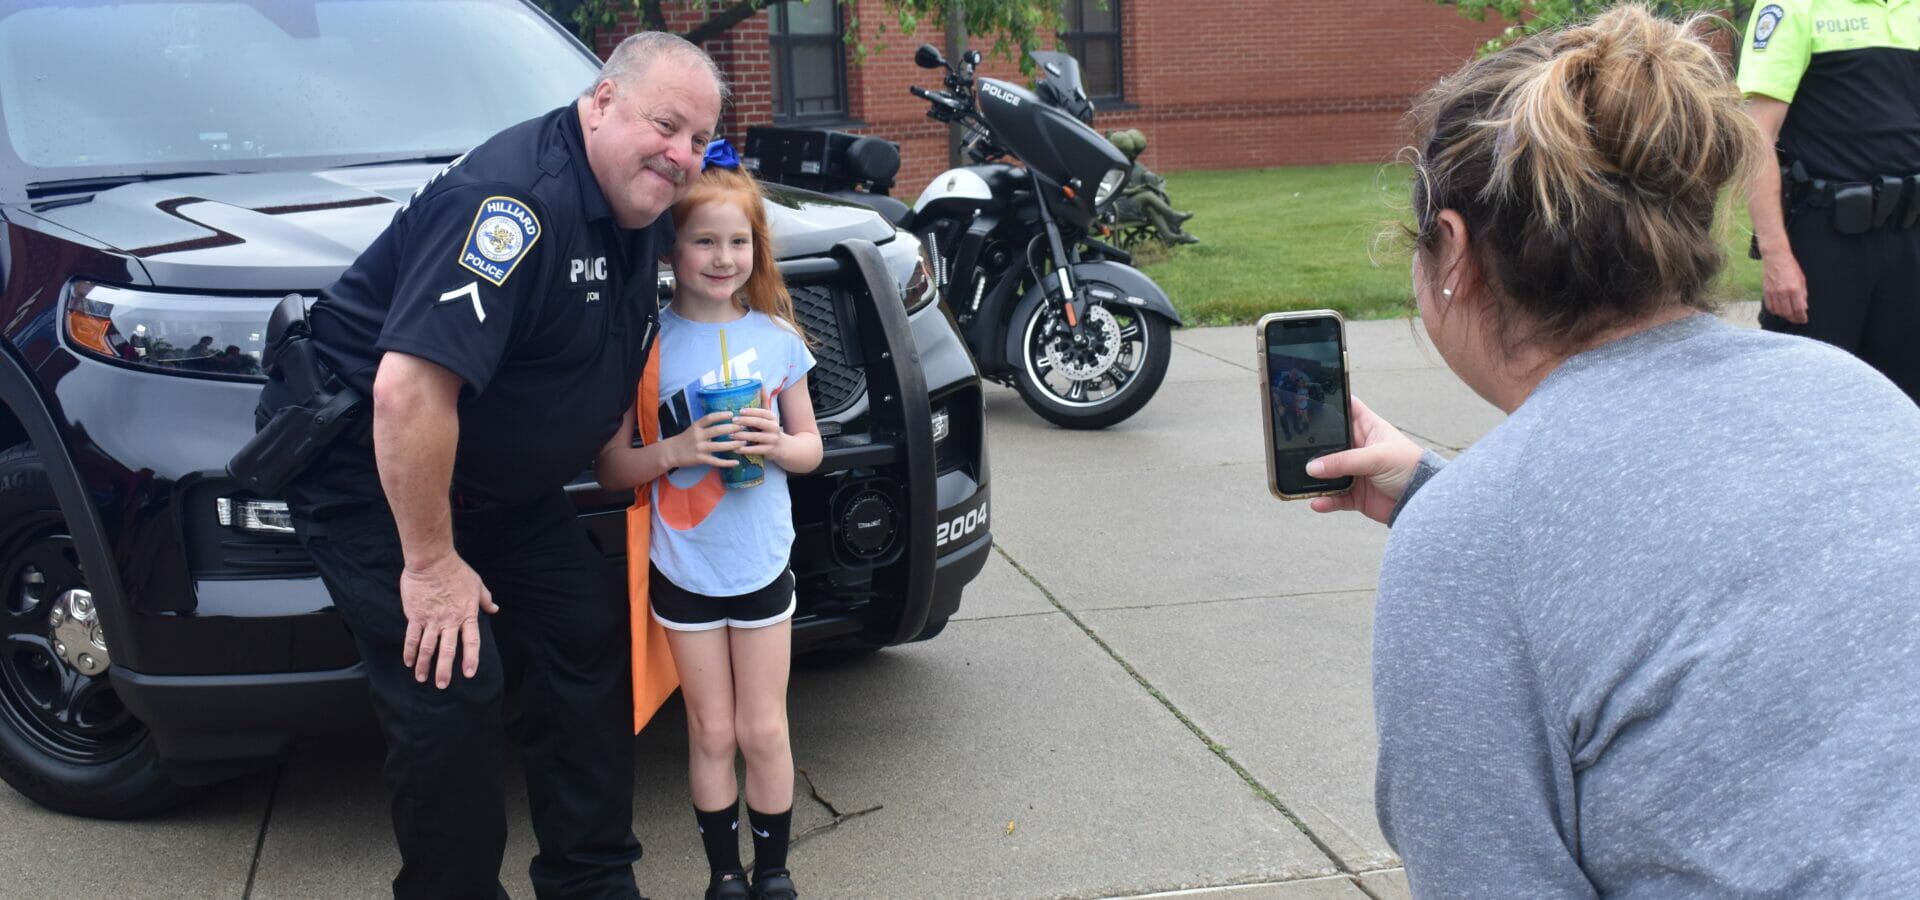 A girl posing in front of police cruiser with officer